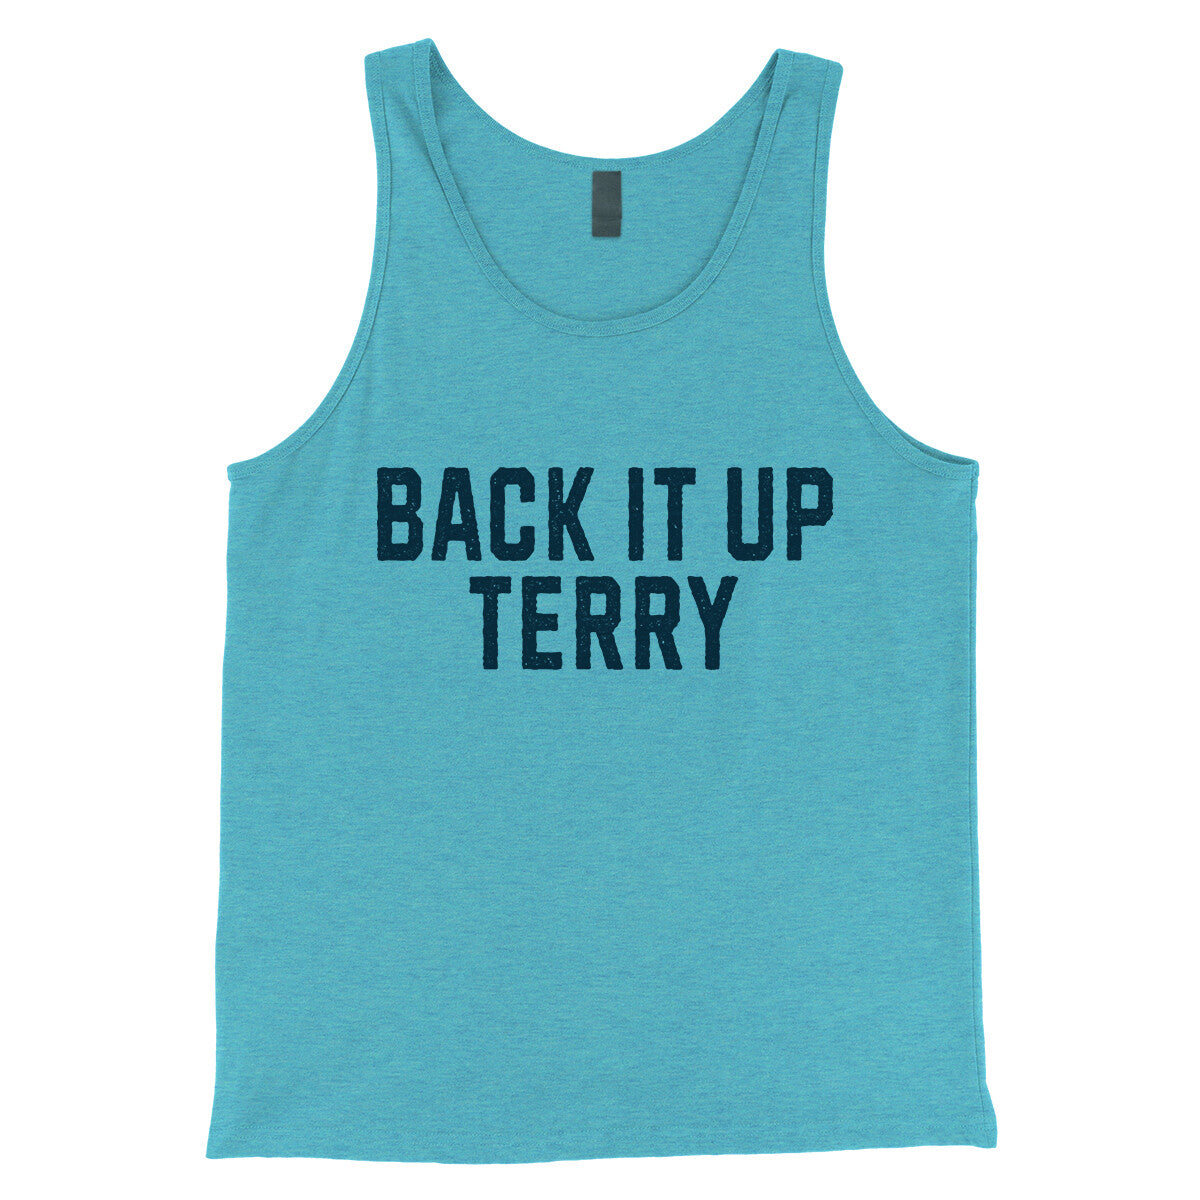 Back it up Terry in Aqua Triblend Color